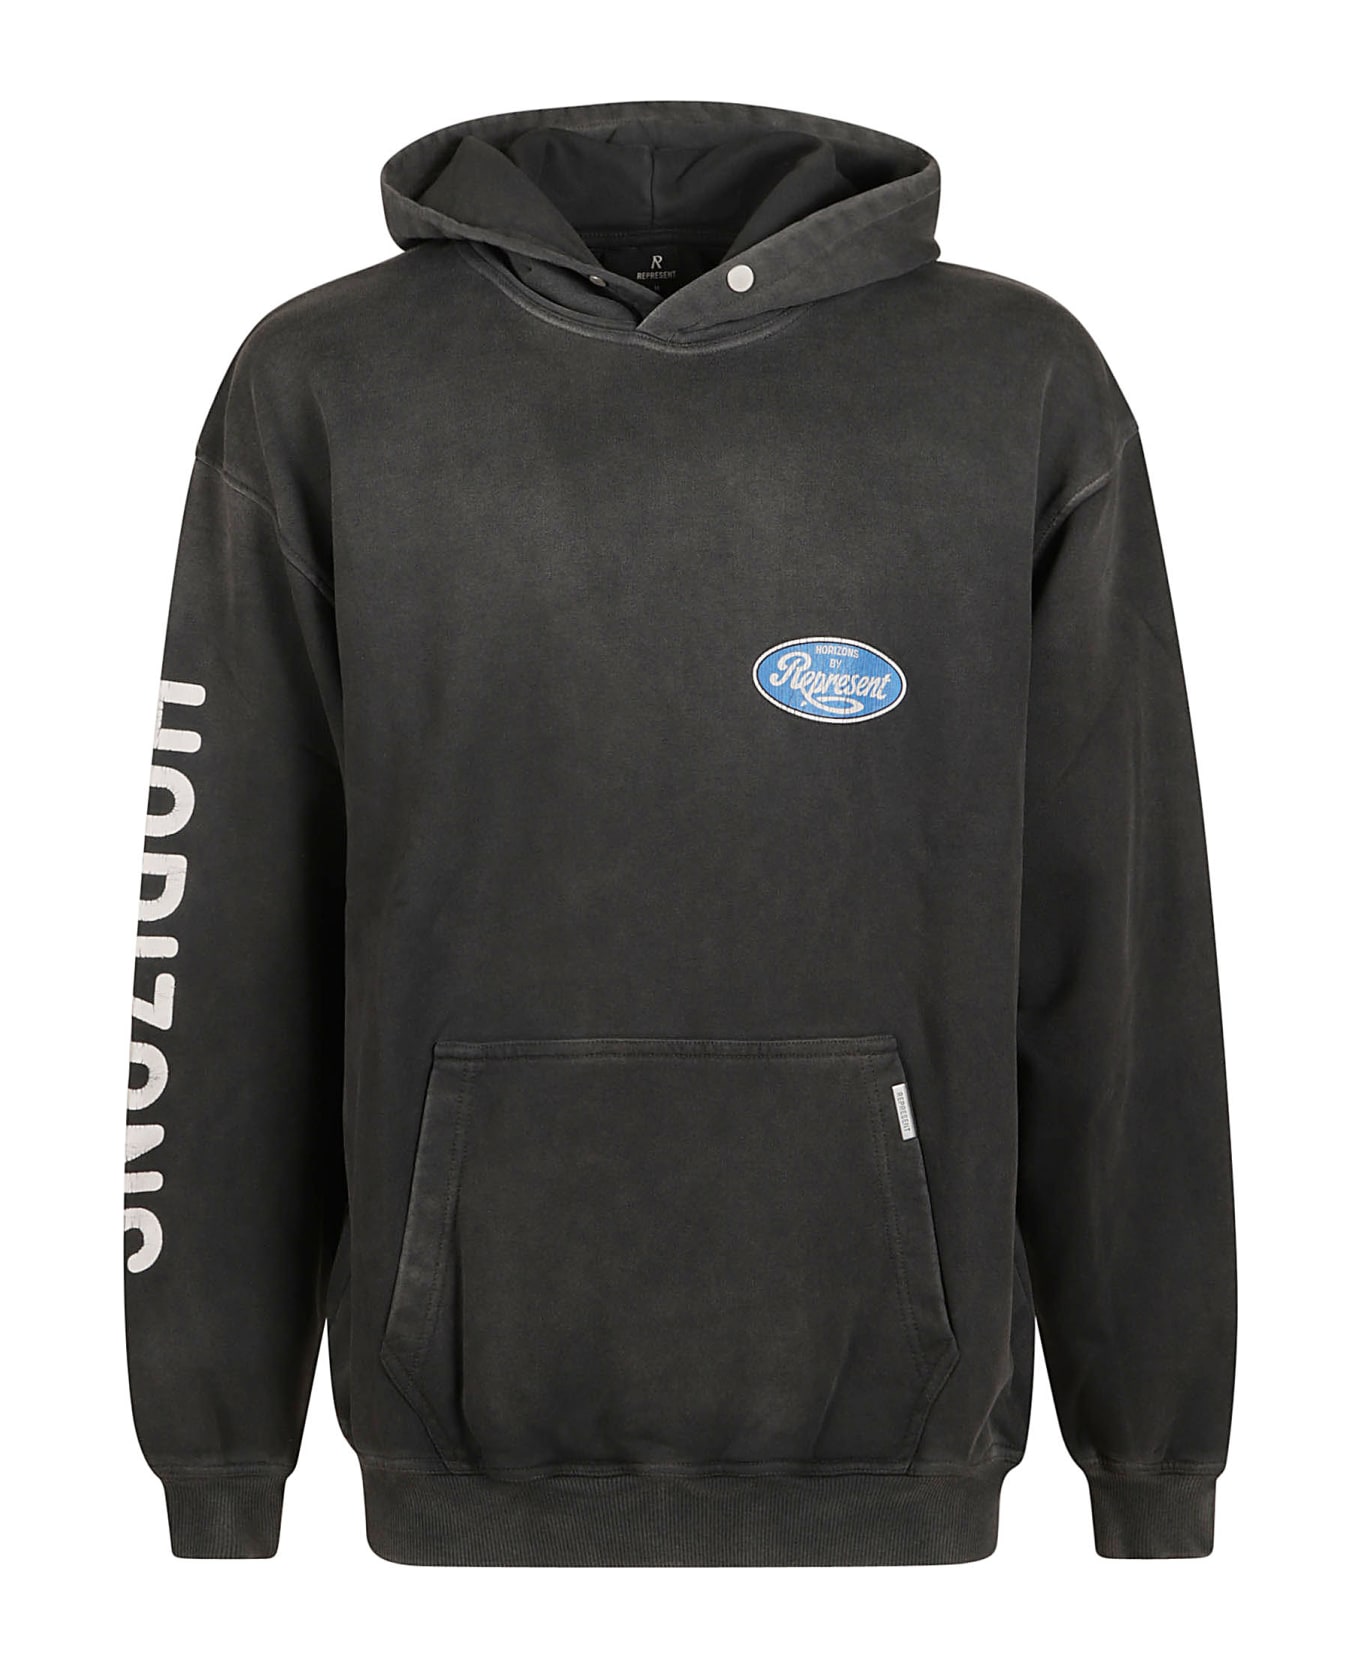 REPRESENT Classic Parts Hoodie - Aged Black